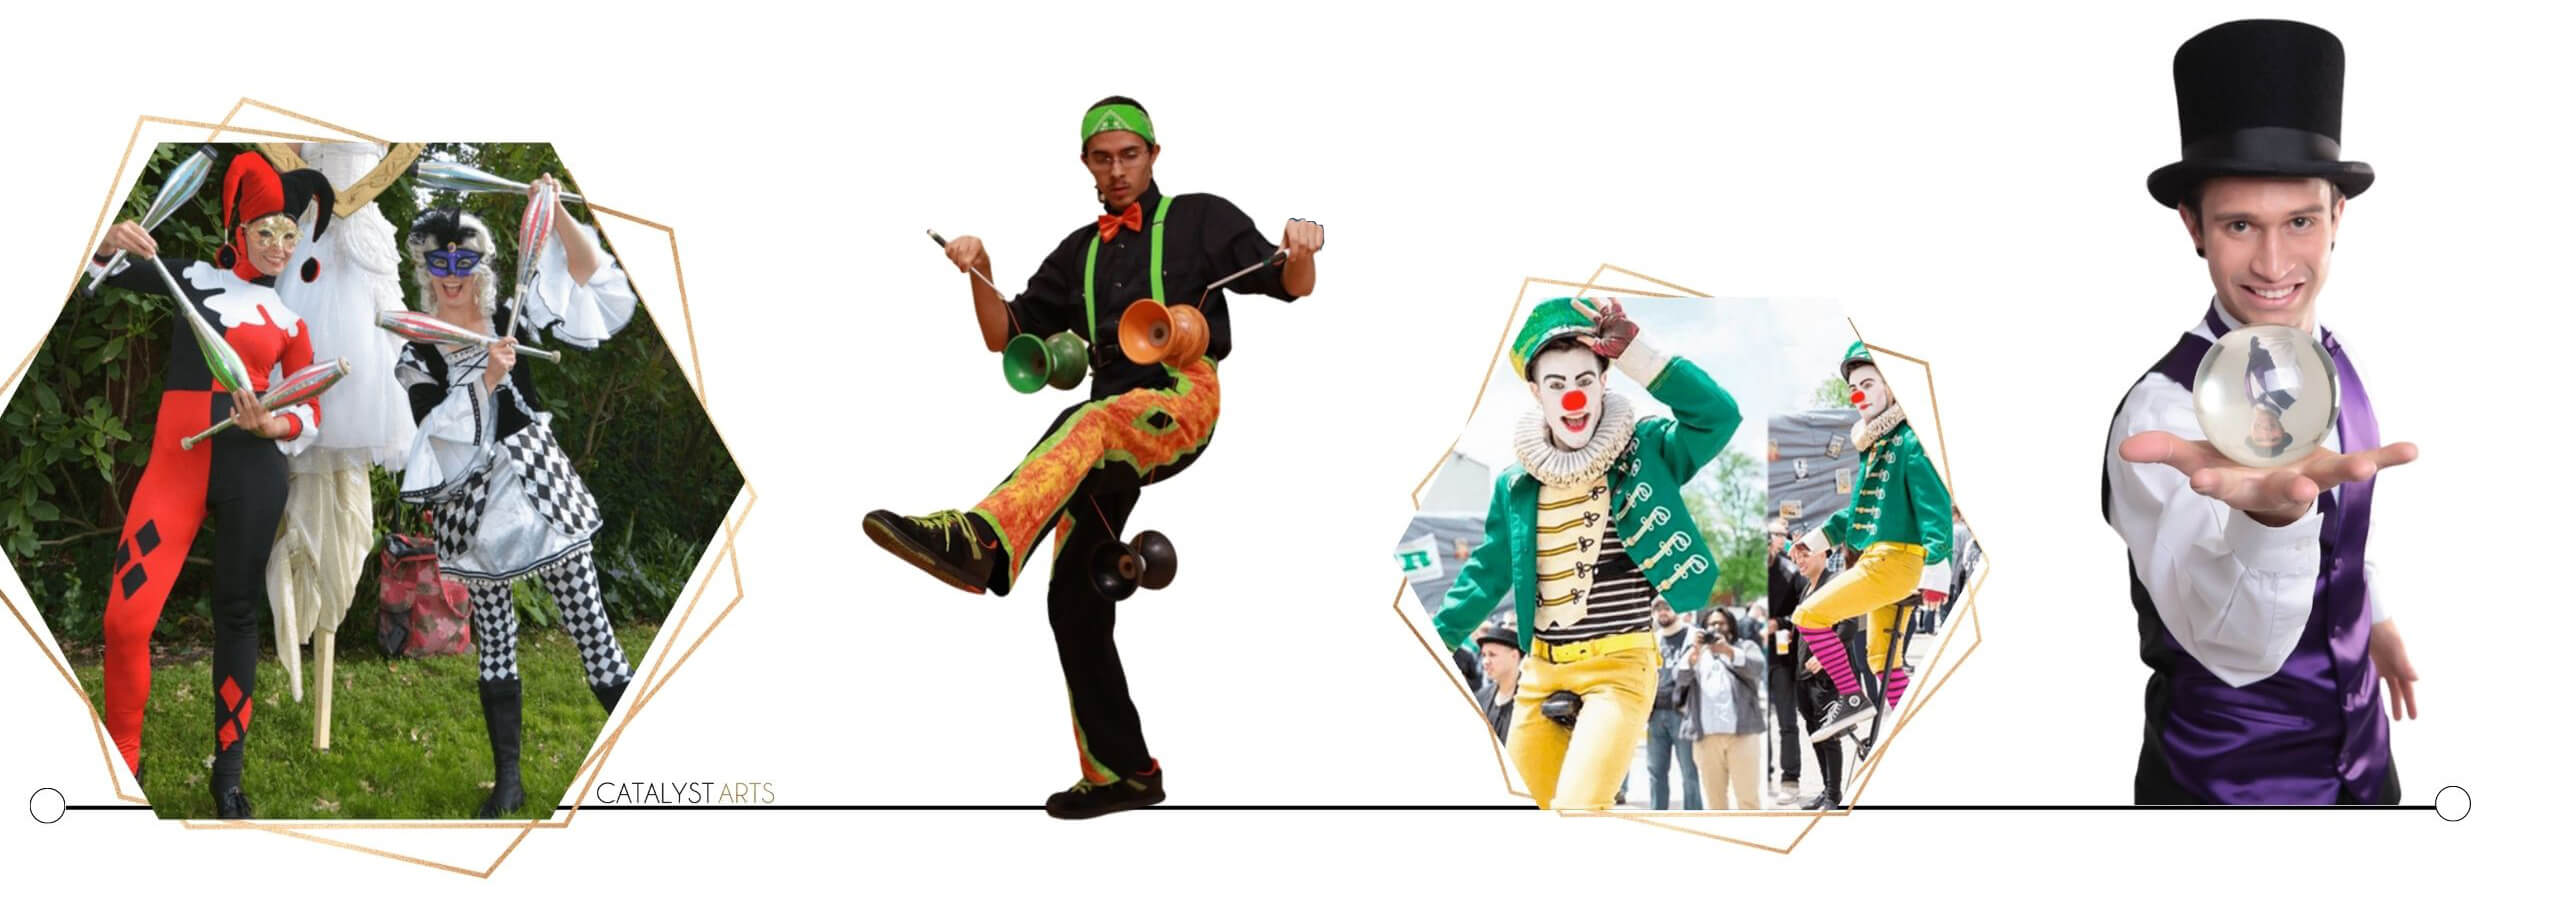 Juggler Jester & Unicycle Performers by Catalyst Arts Entertainment